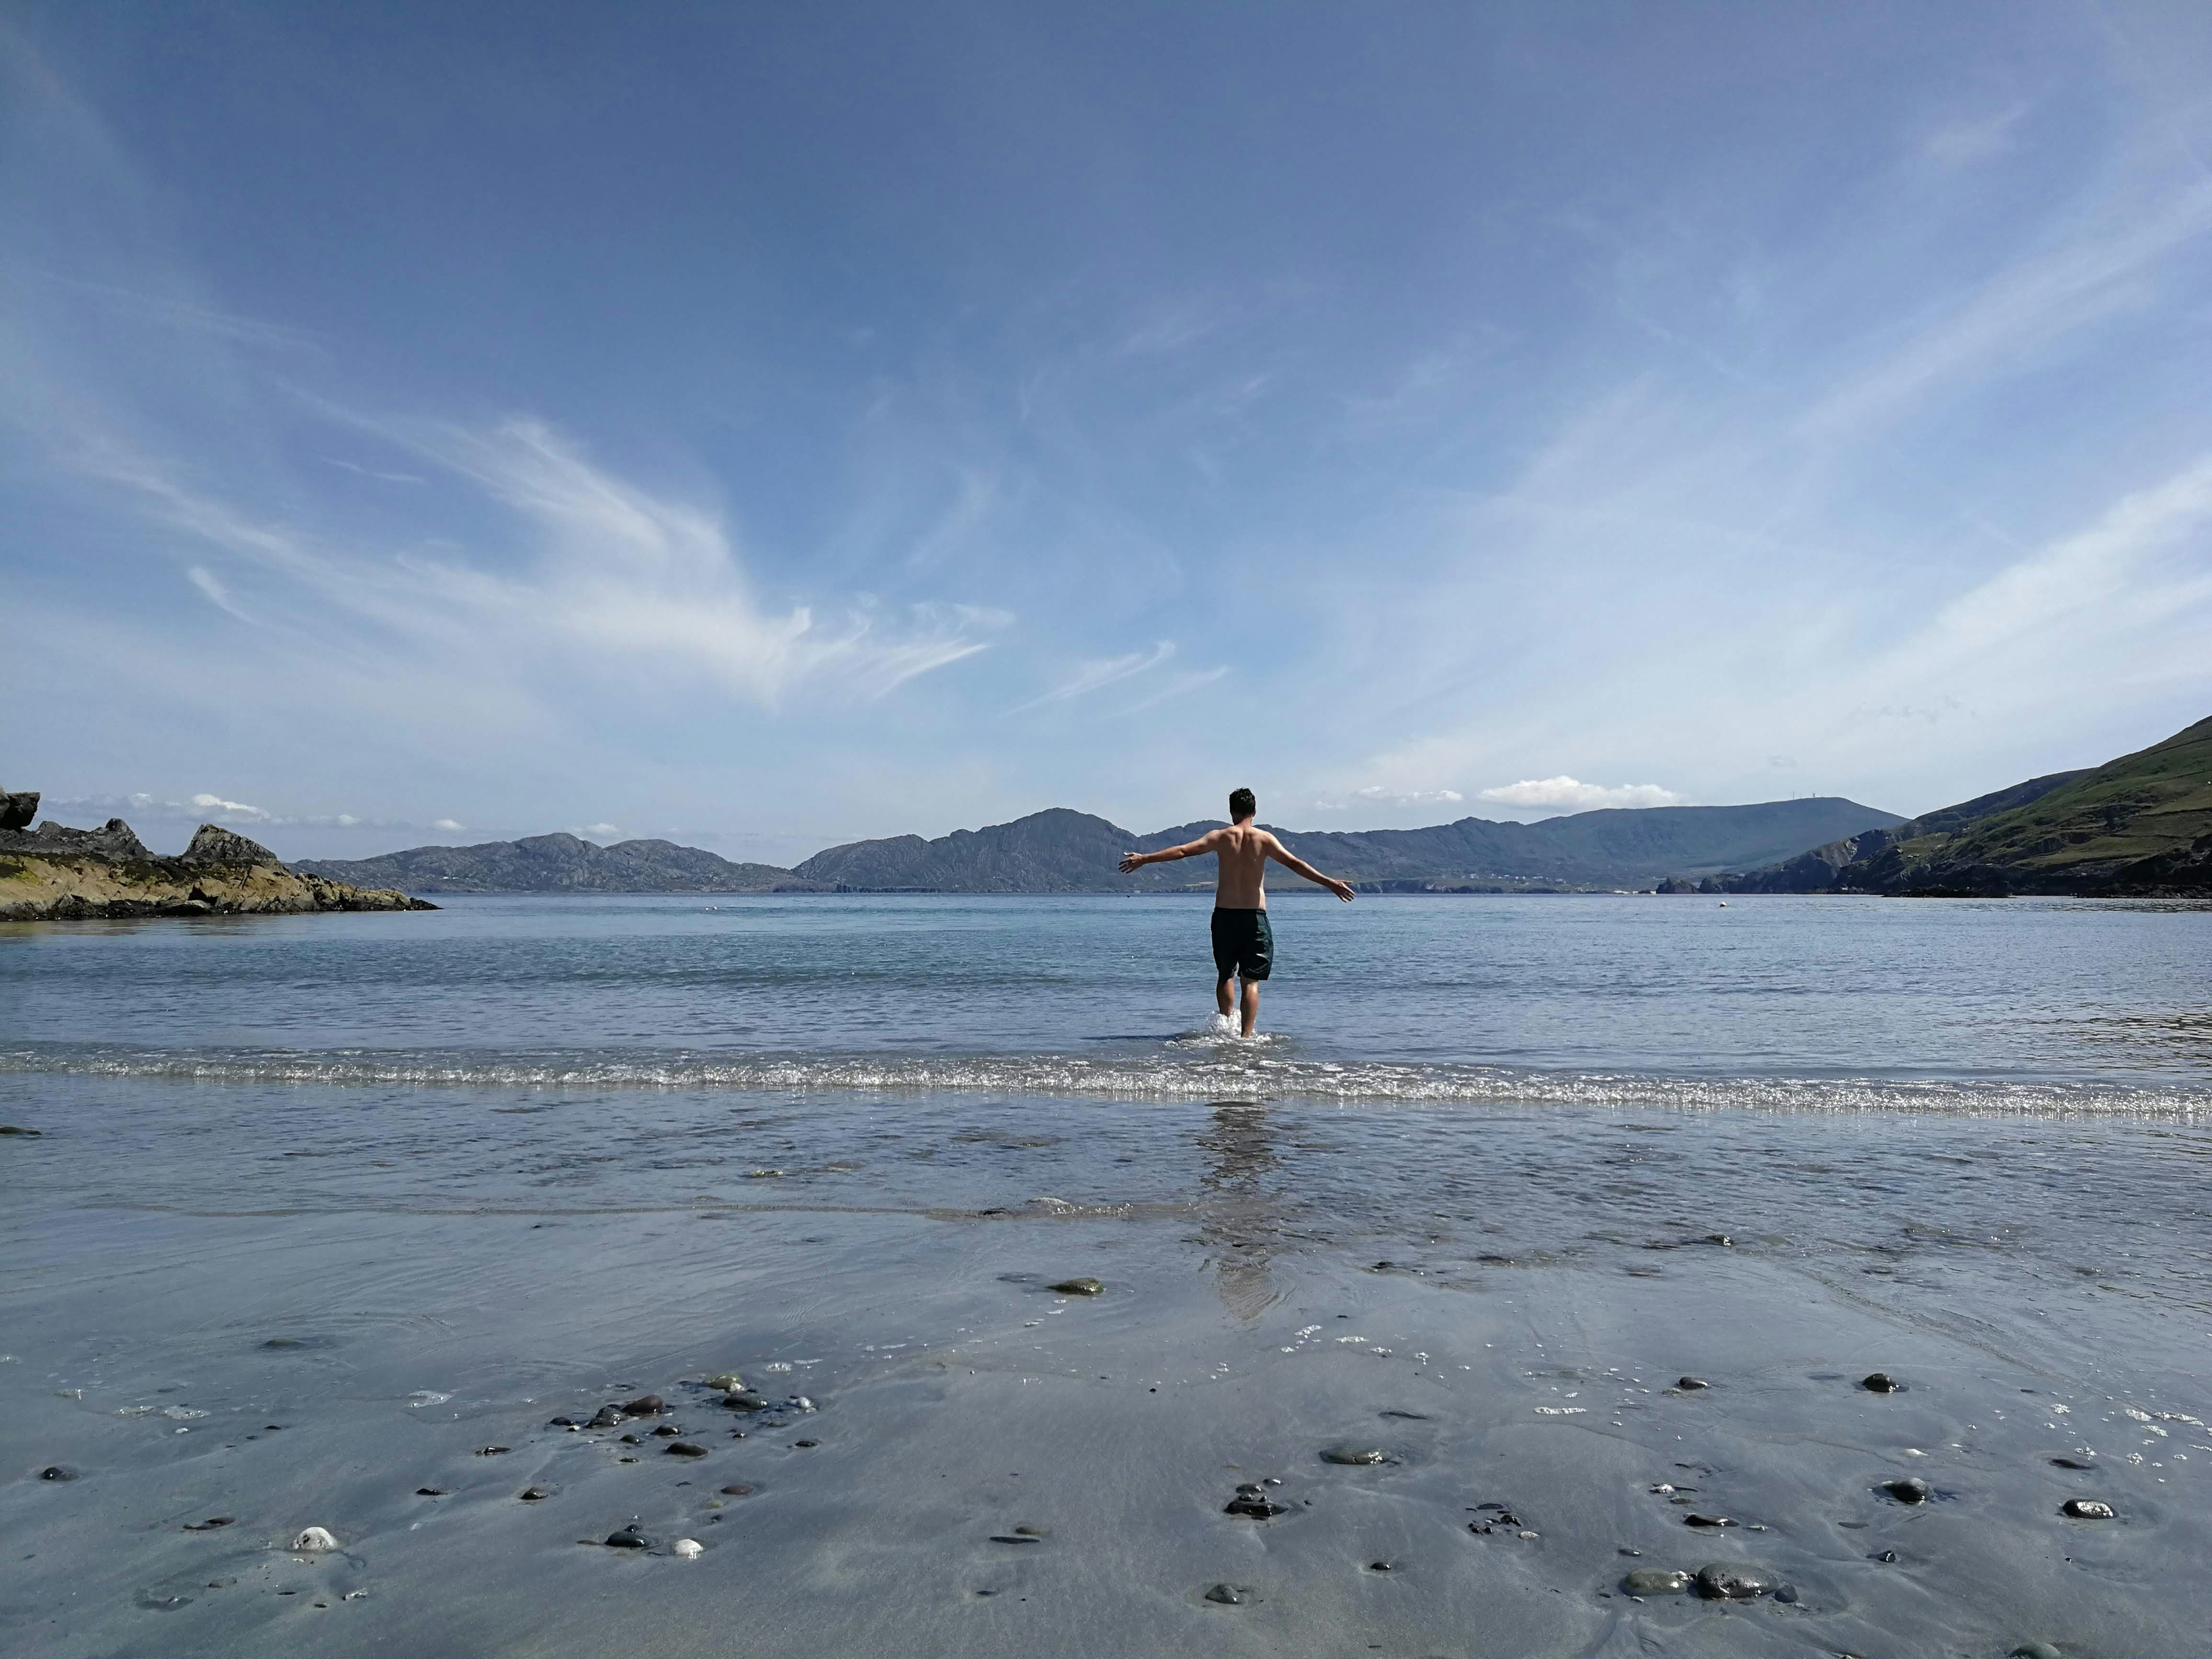 A rugged beach scene; the sky is bright blue and has wispy clouds, and craggy hills can be seen in the distance. Writer Joe Davis, wearing swimming shorts, is walking out into the calm water, his arms outstretched.